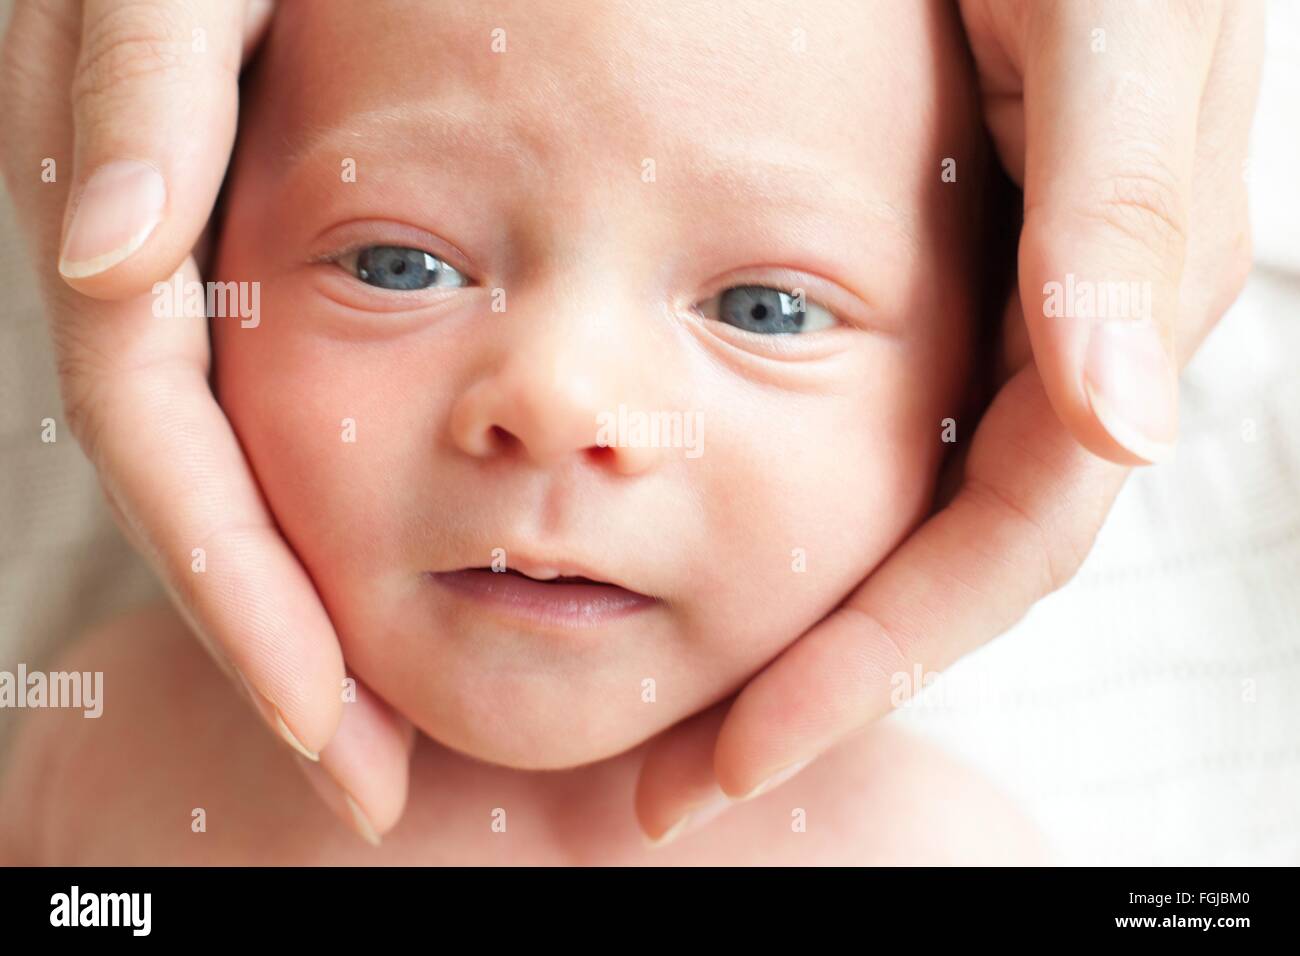 MODEL RELEASED. Person with hands touching newborn baby's face. Stock Photo